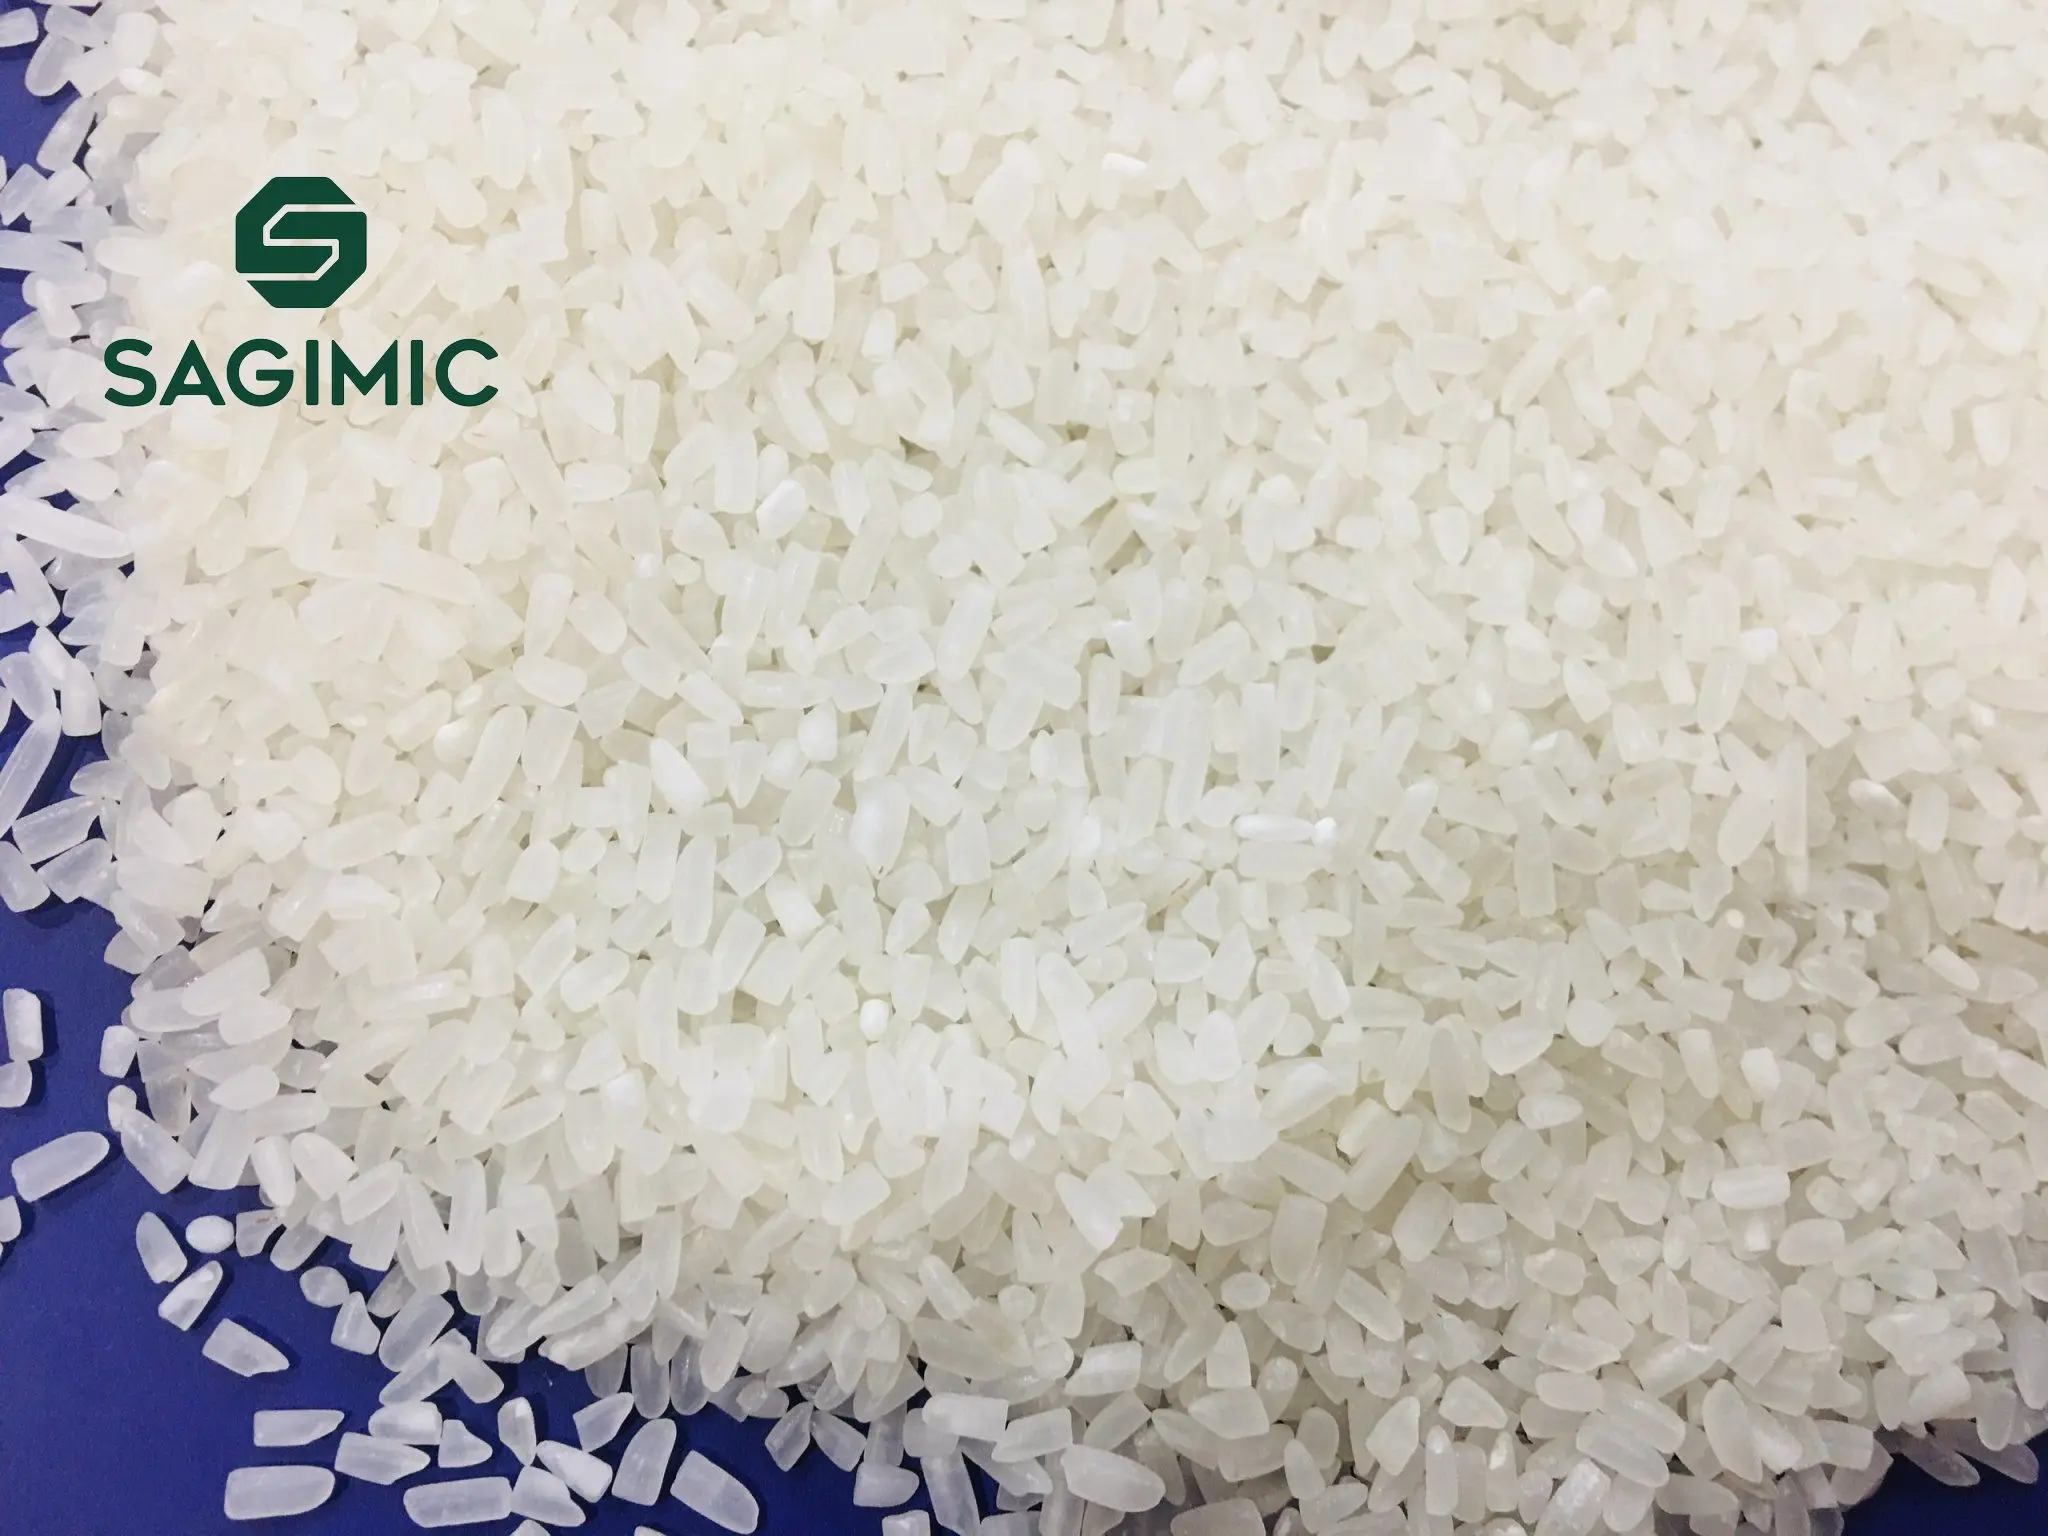 Hot Selling 100% broken jasmine rice with cheapest price from Vietnam